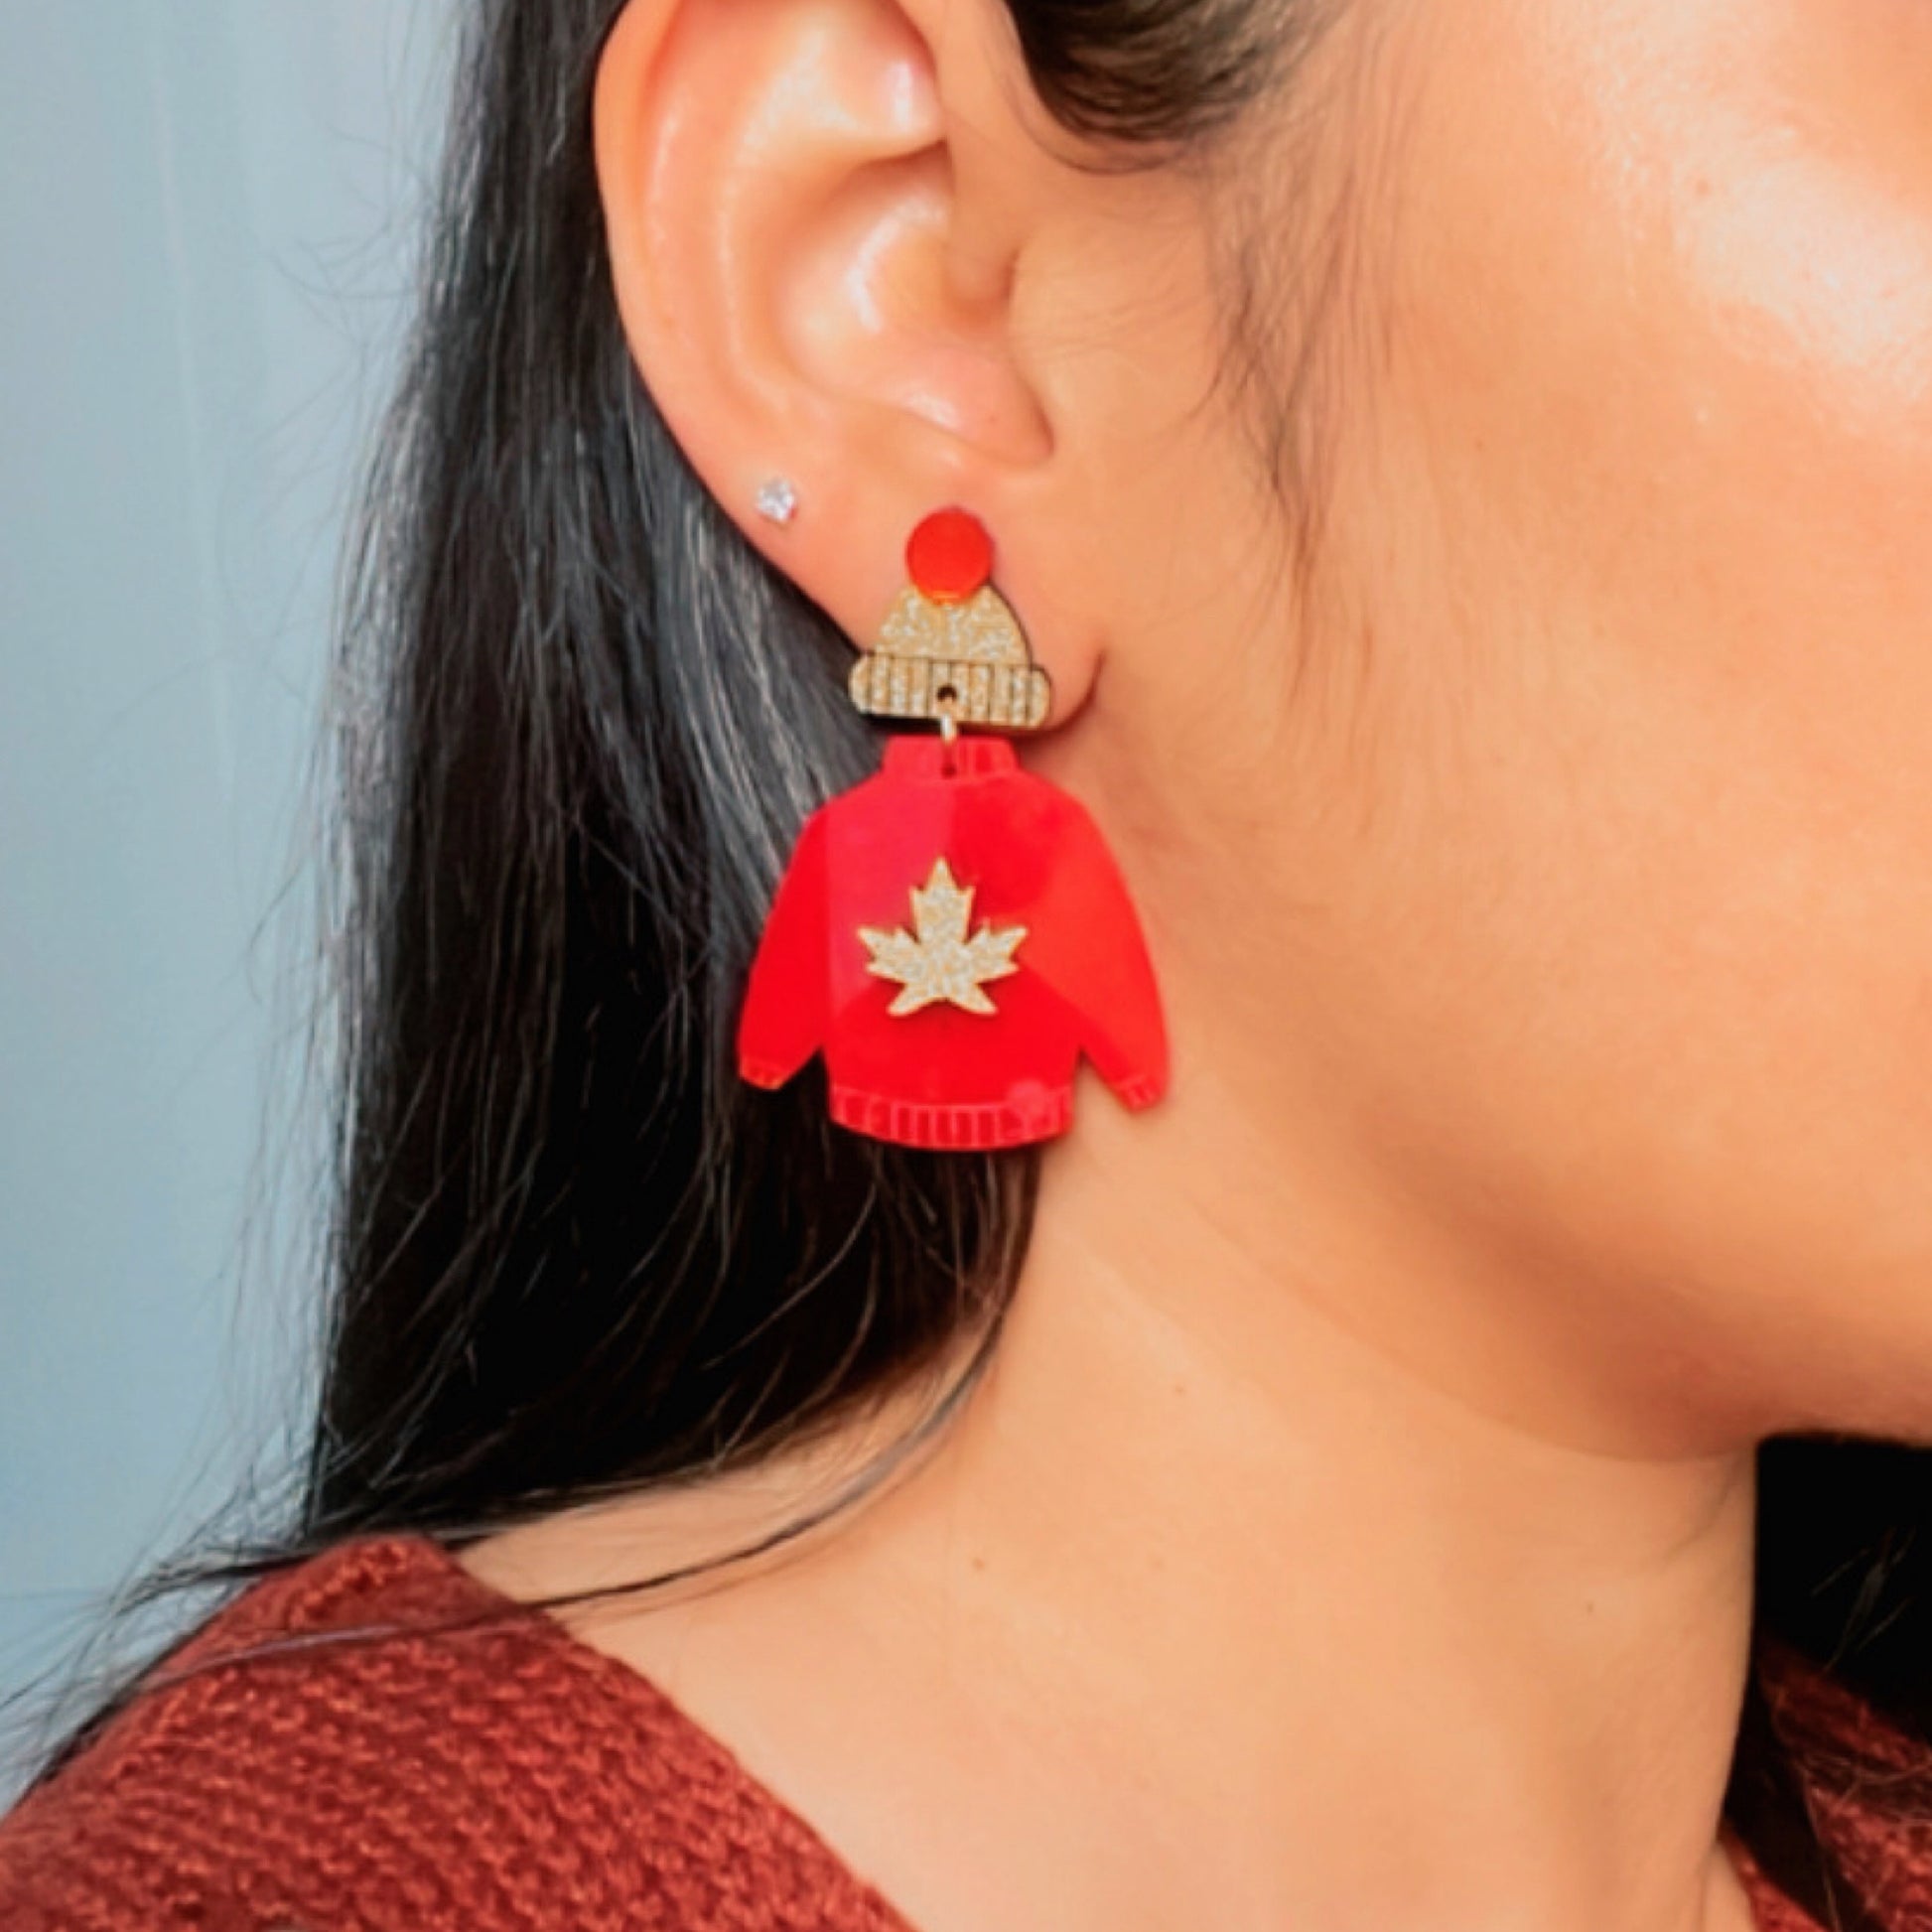 Wool Wrap Earrings - Red and Shimmer Golden - Nian by Nidhi - worn by a woman